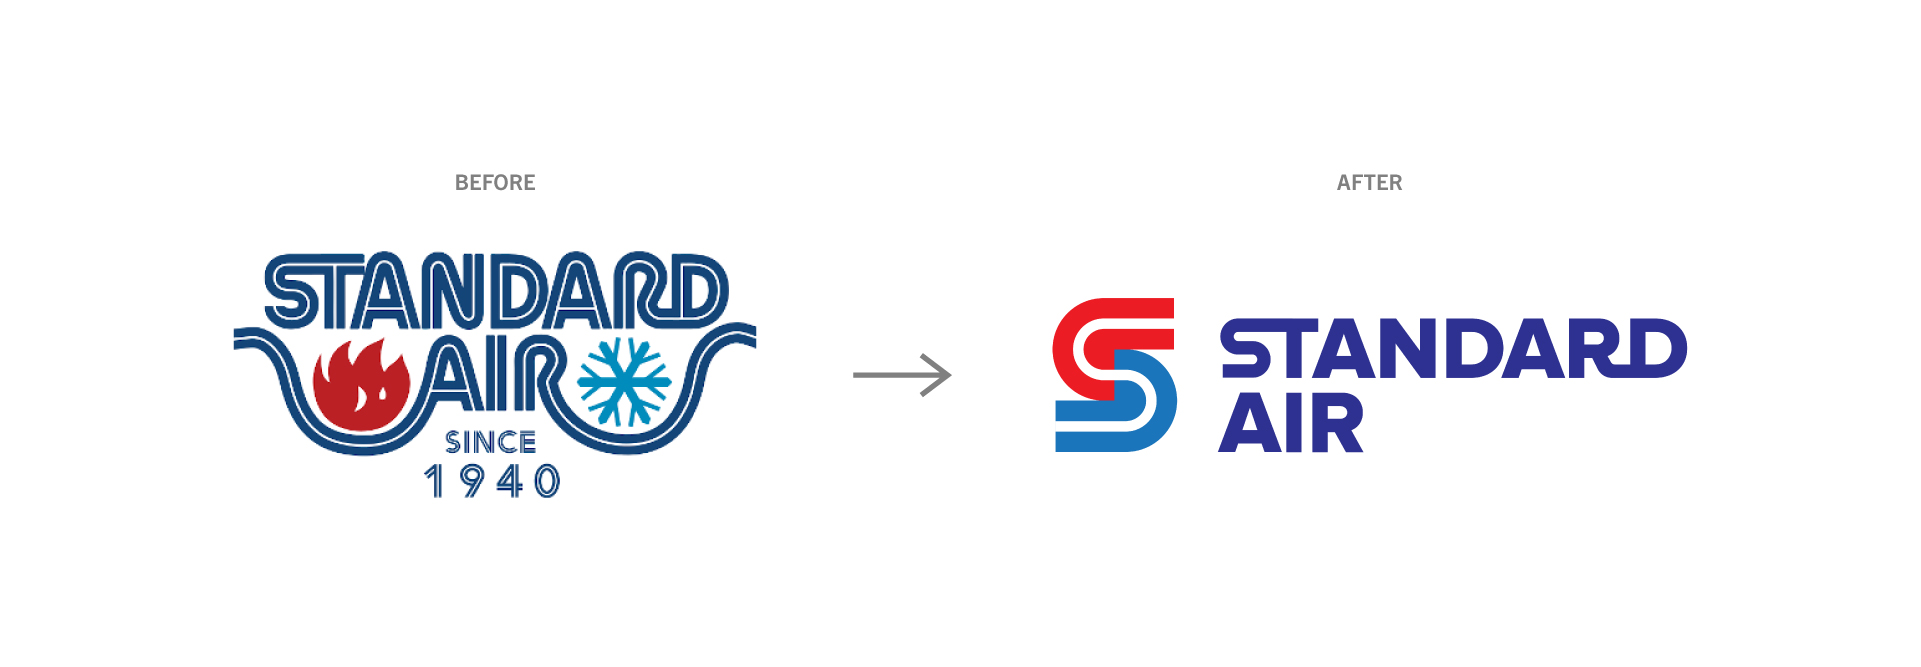 Standard Air logo, before and after